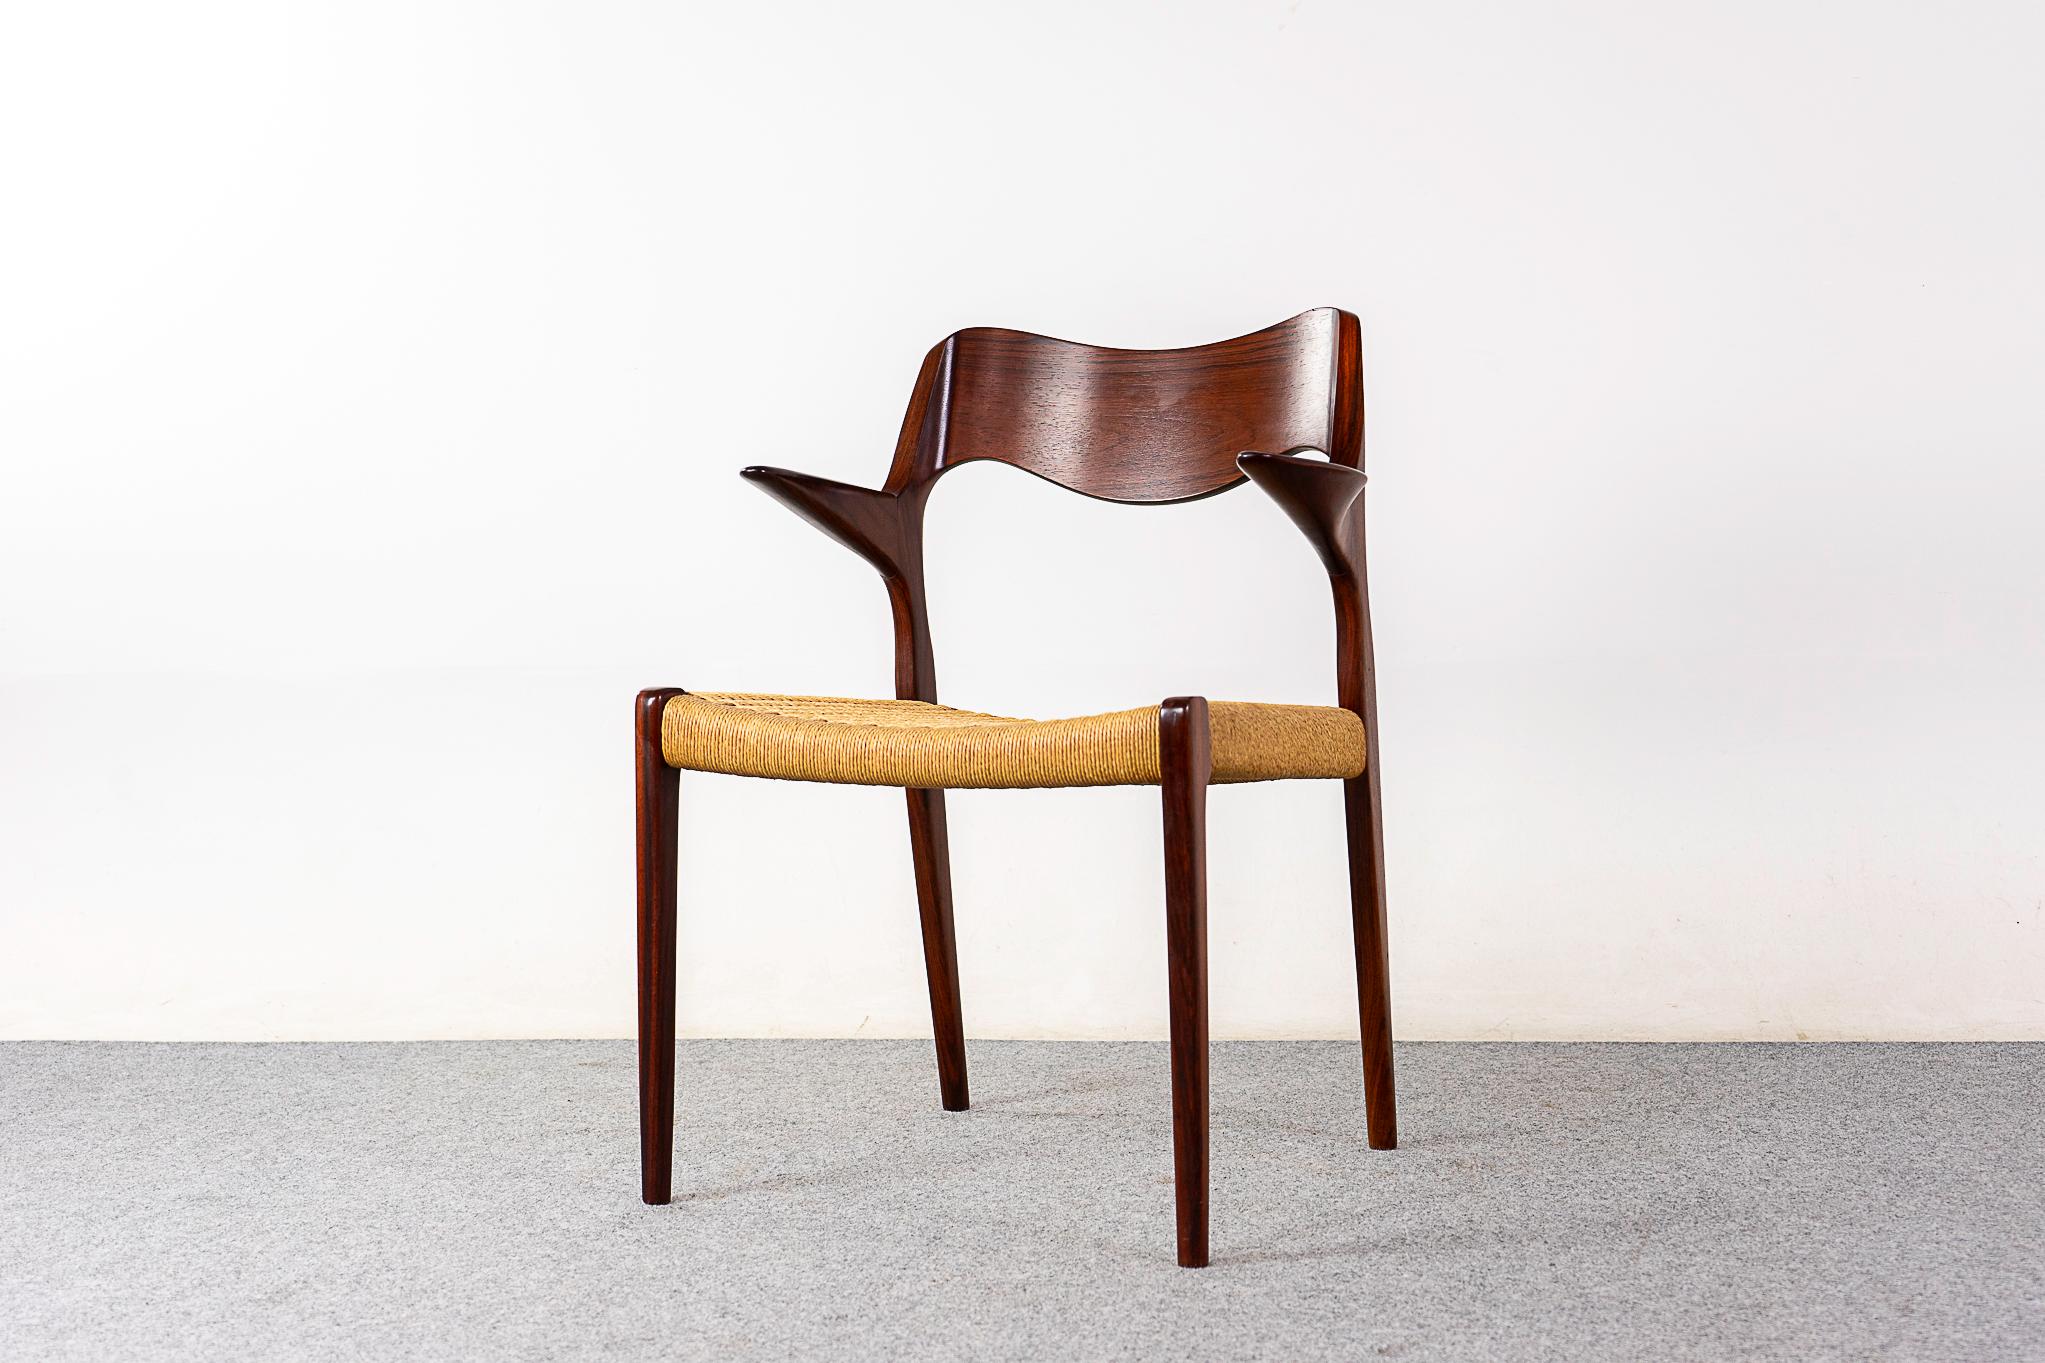 Rosewood model 55 armchair by Niels Otto Moller for J L Moller Mobelfabrik, circa 1950's. Iconic frame with graceful lines, sculptural floating armrests and a meticulously woven paper cord seat. JL Moller maker's mark intact. 

Please inquire for